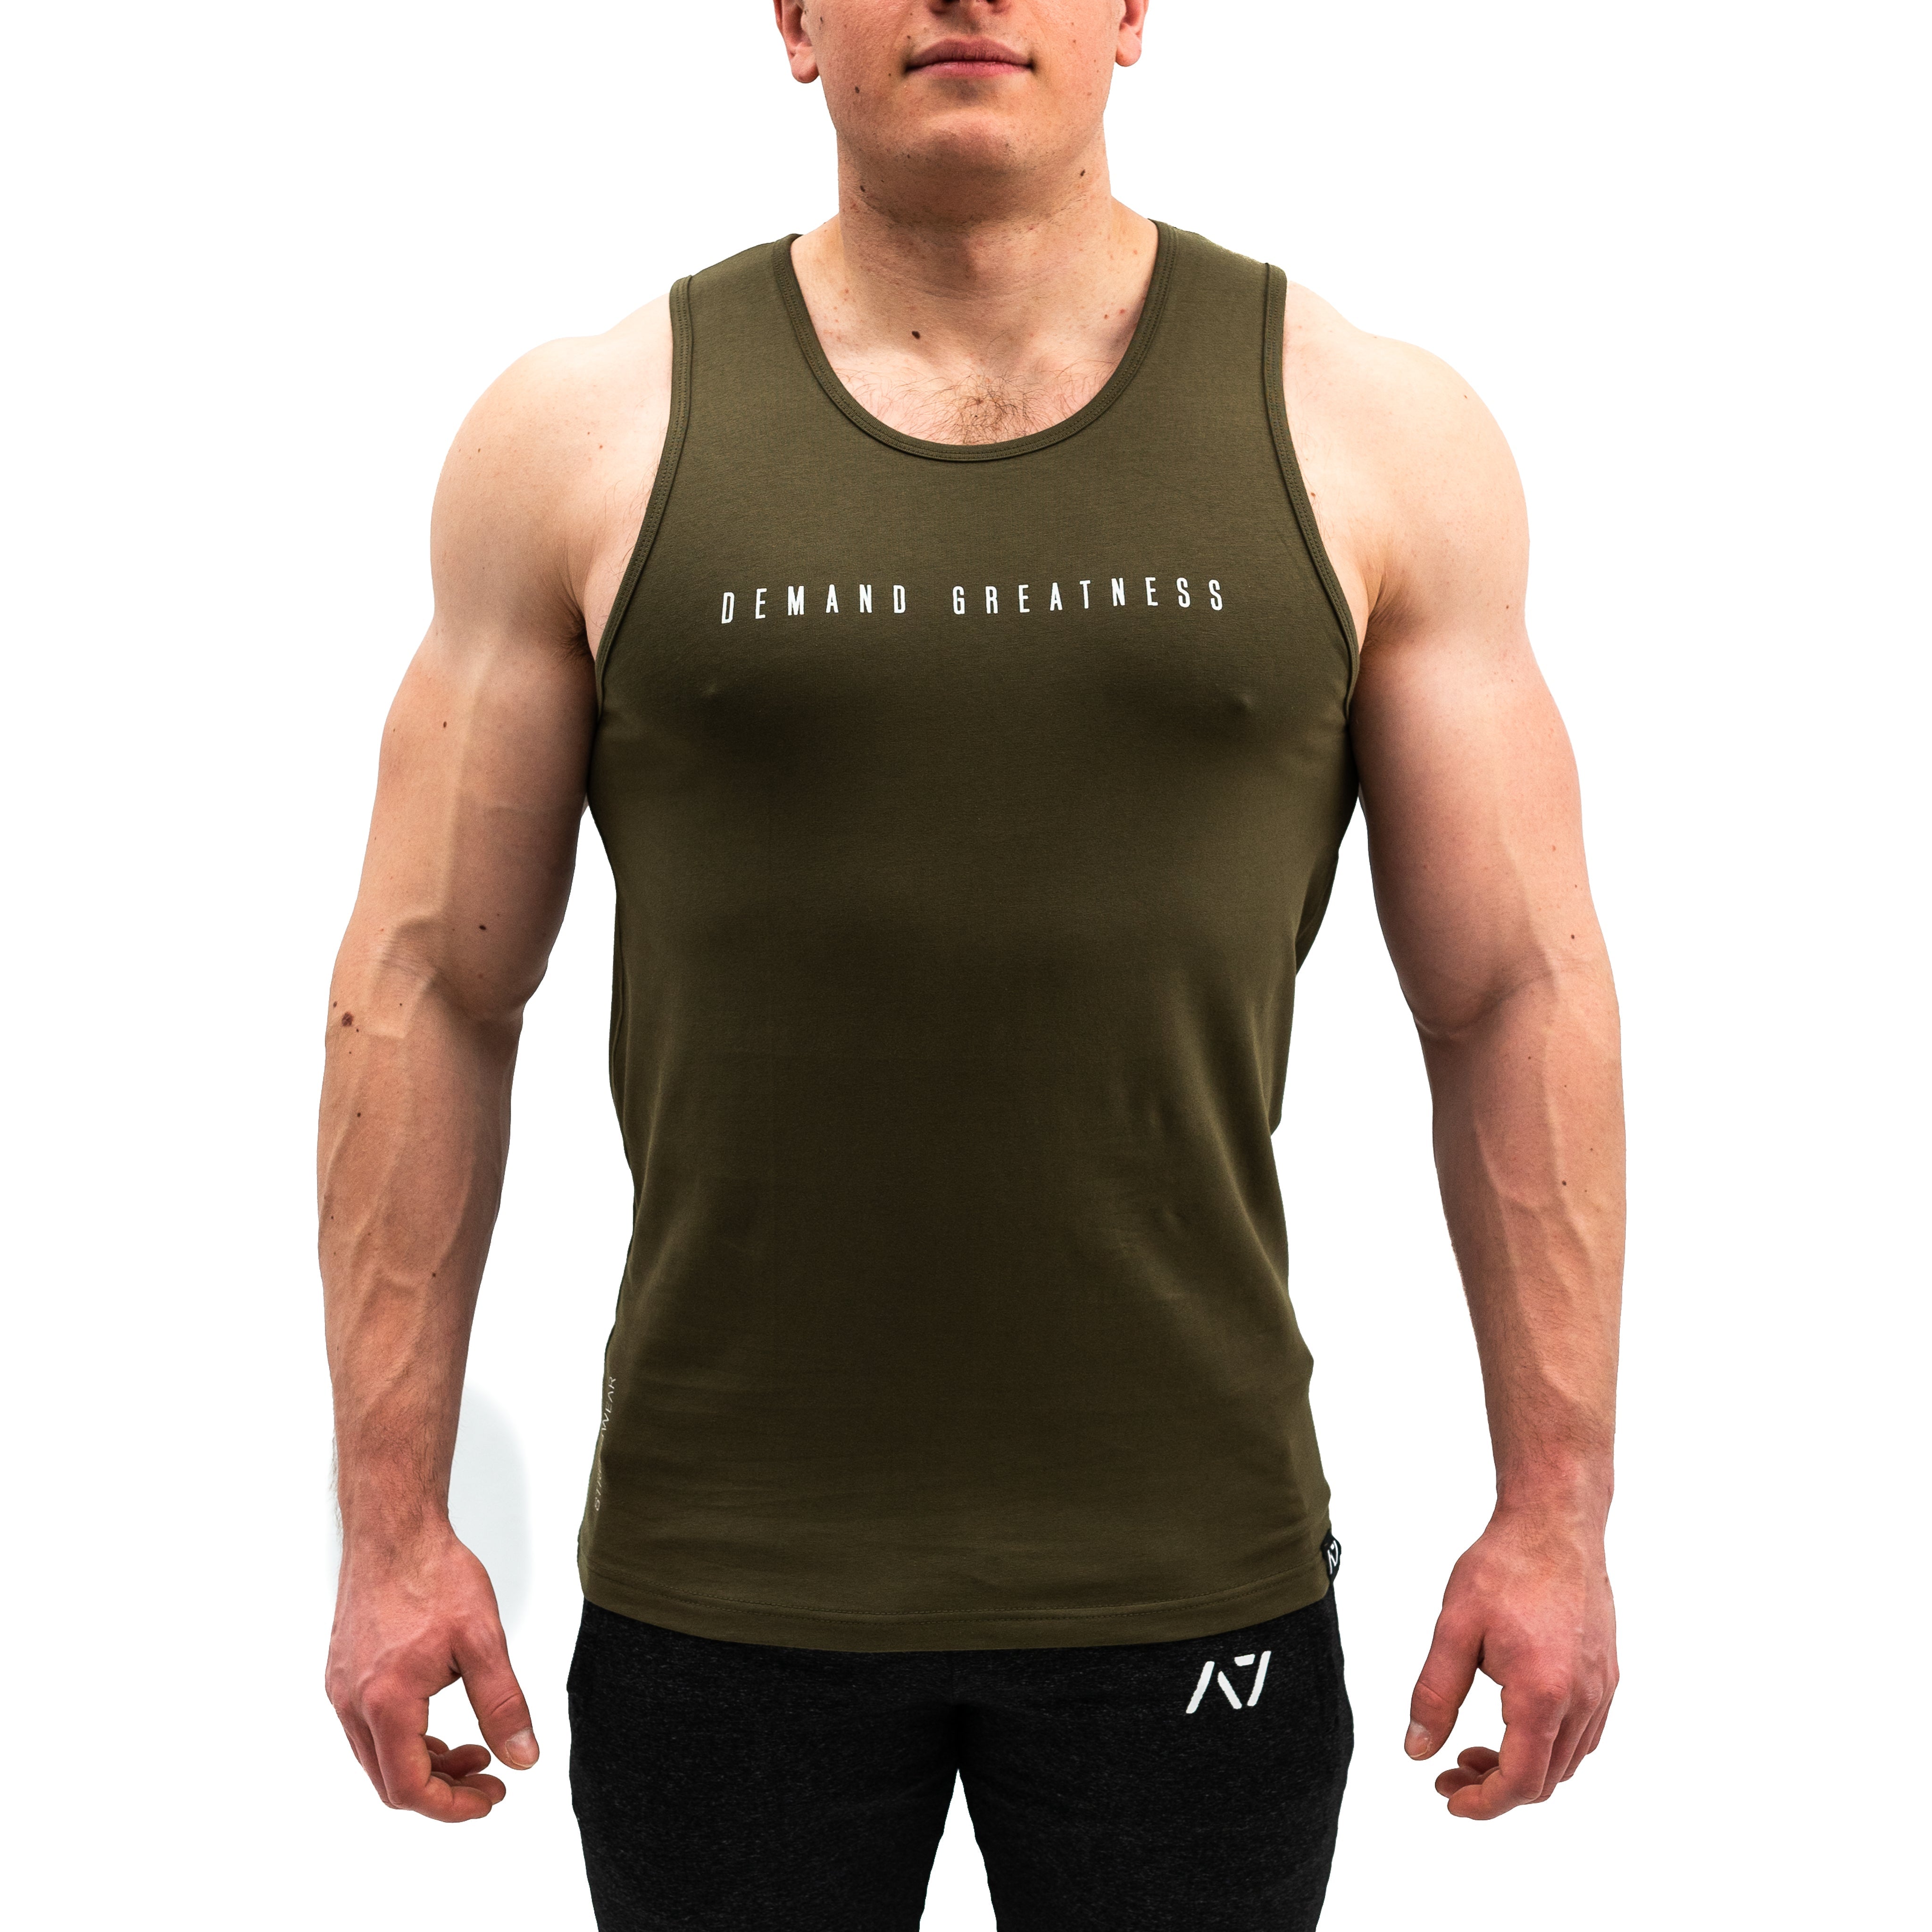 Mantra Bar Grip tank, great as a squat shirt. Purchase Mantra Bar Grip tank in UK from A7 UK. Purchase Mantra Bar Grip Tank in Europe from A7 Europe. No more chalk or sliding. Best Bar Grip T-shirts, shipping to UK and Europe from A7 UK. Mantra Bar Grip Tank is our newest tank design with demand greatness on the front in a military colourway! A7UK supplies the best Powerlifting apparel for all your workouts. Available in UK and Europe including France, Italy, Germany, the Netherlands, Sweden and Poland.